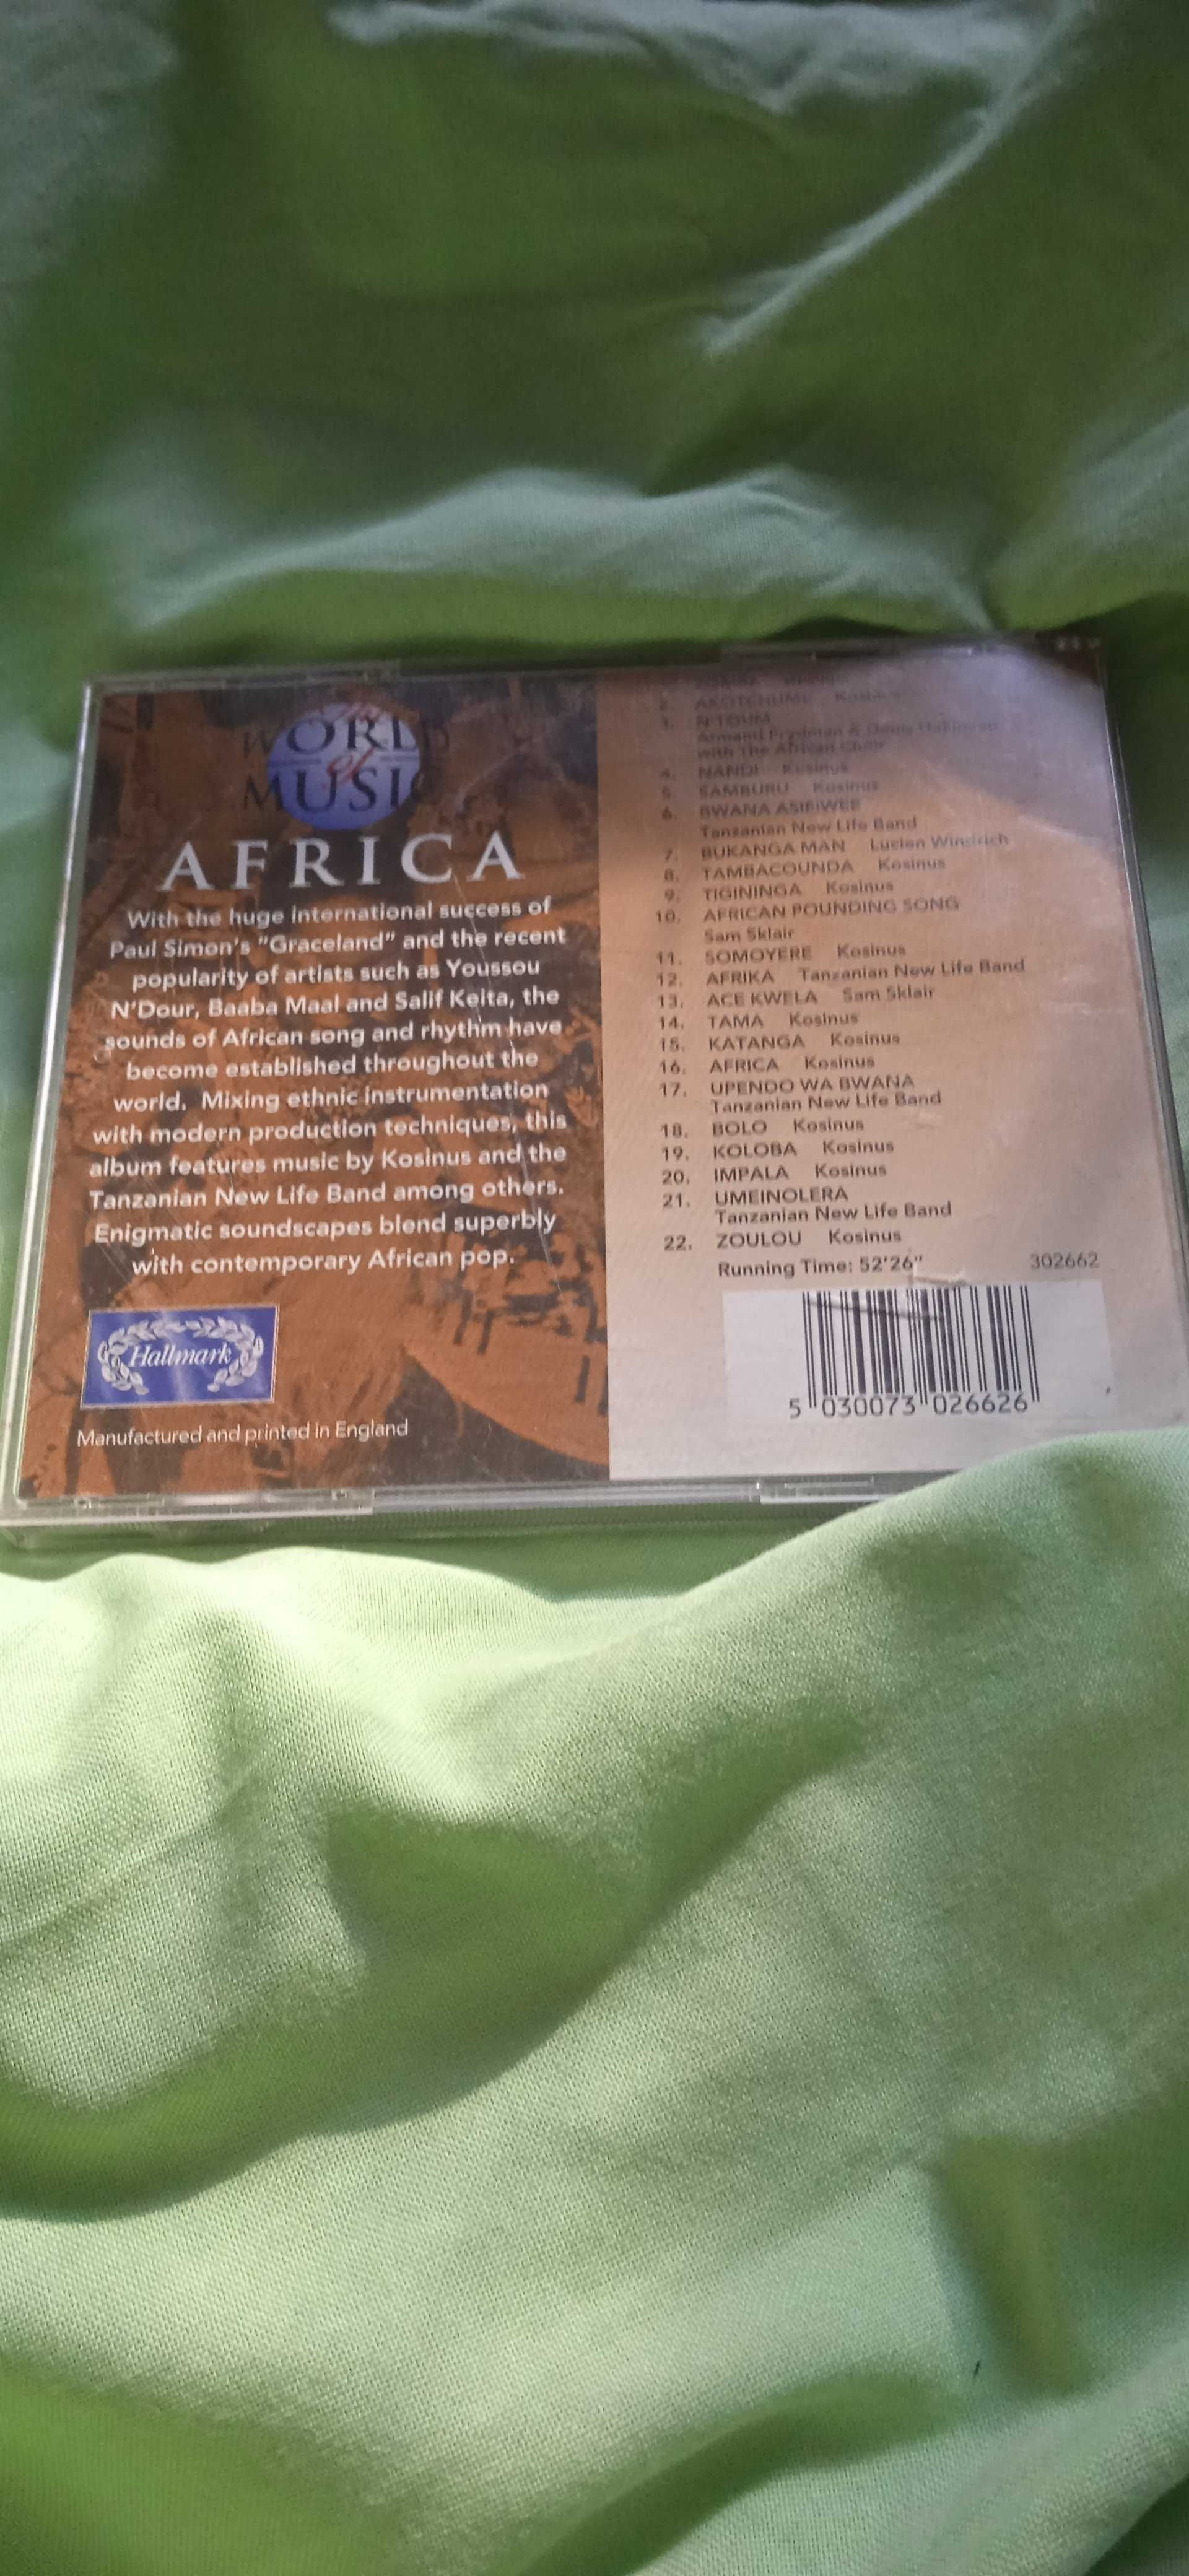 The World of Music - Africa